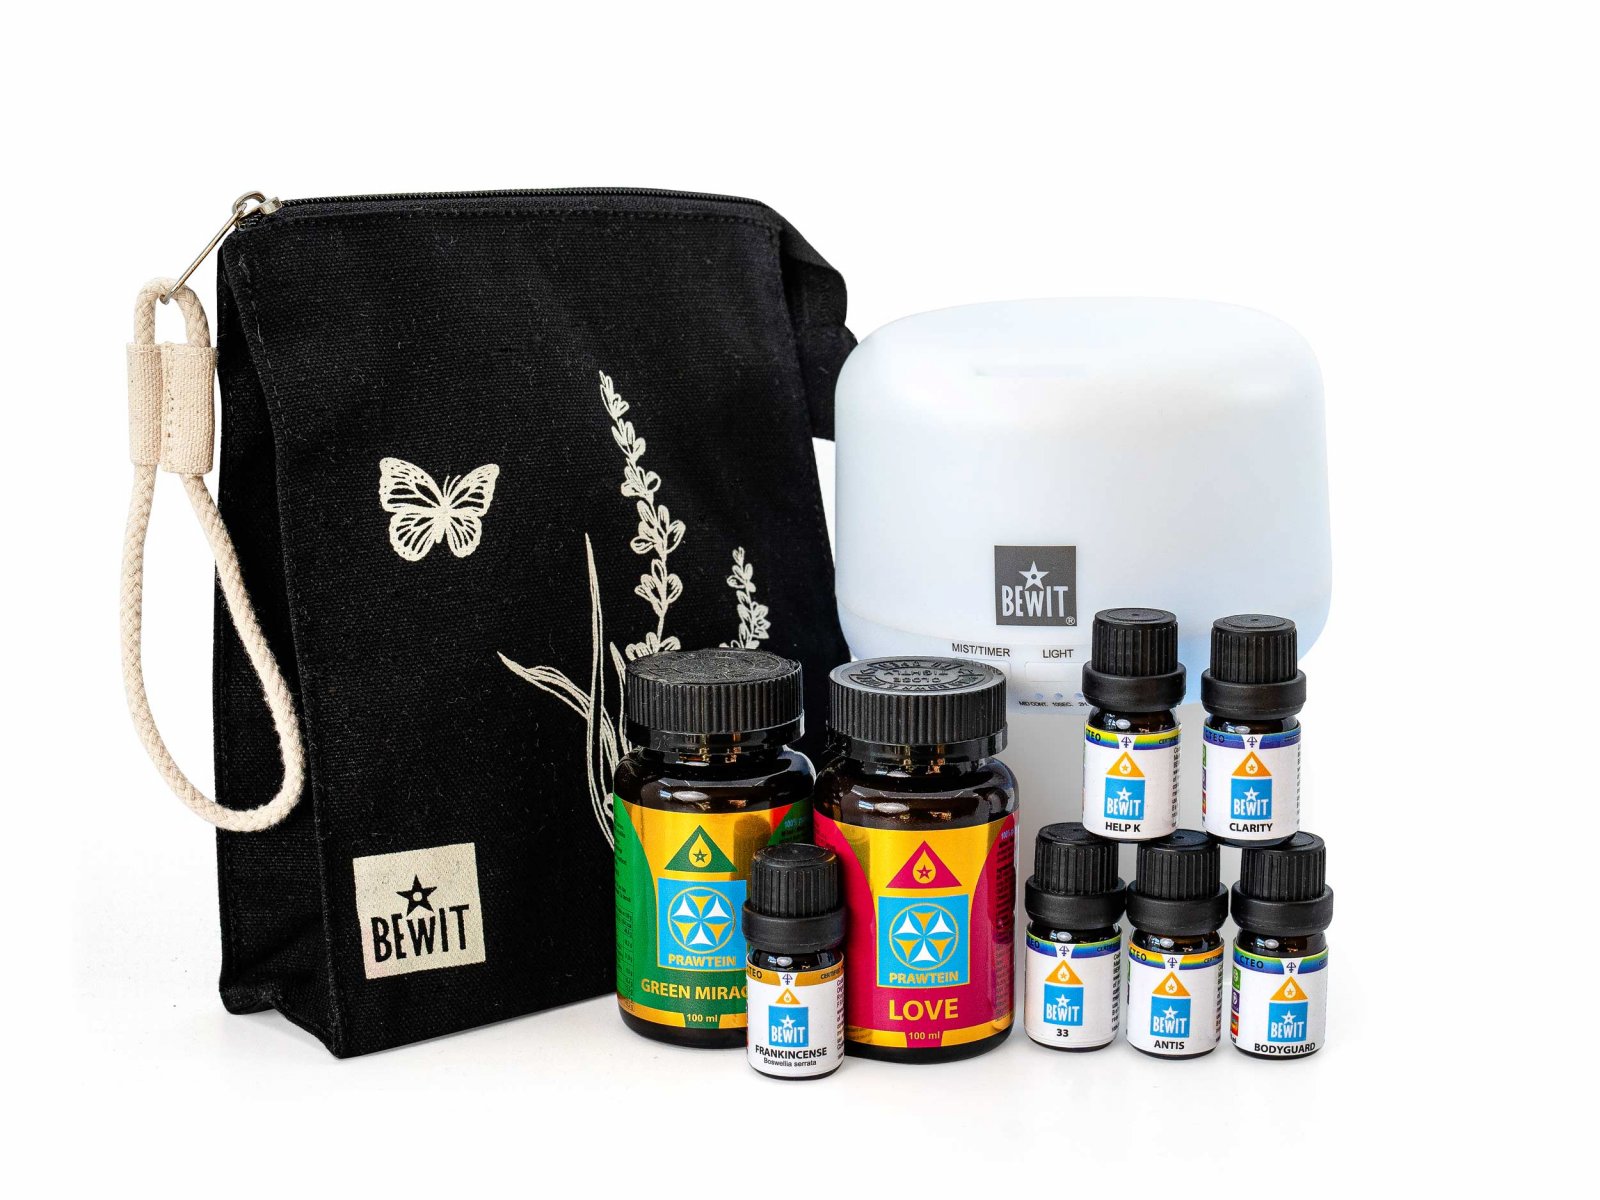 BEWIT Clarity of Mind with diffuser - BEWIT Set - 2